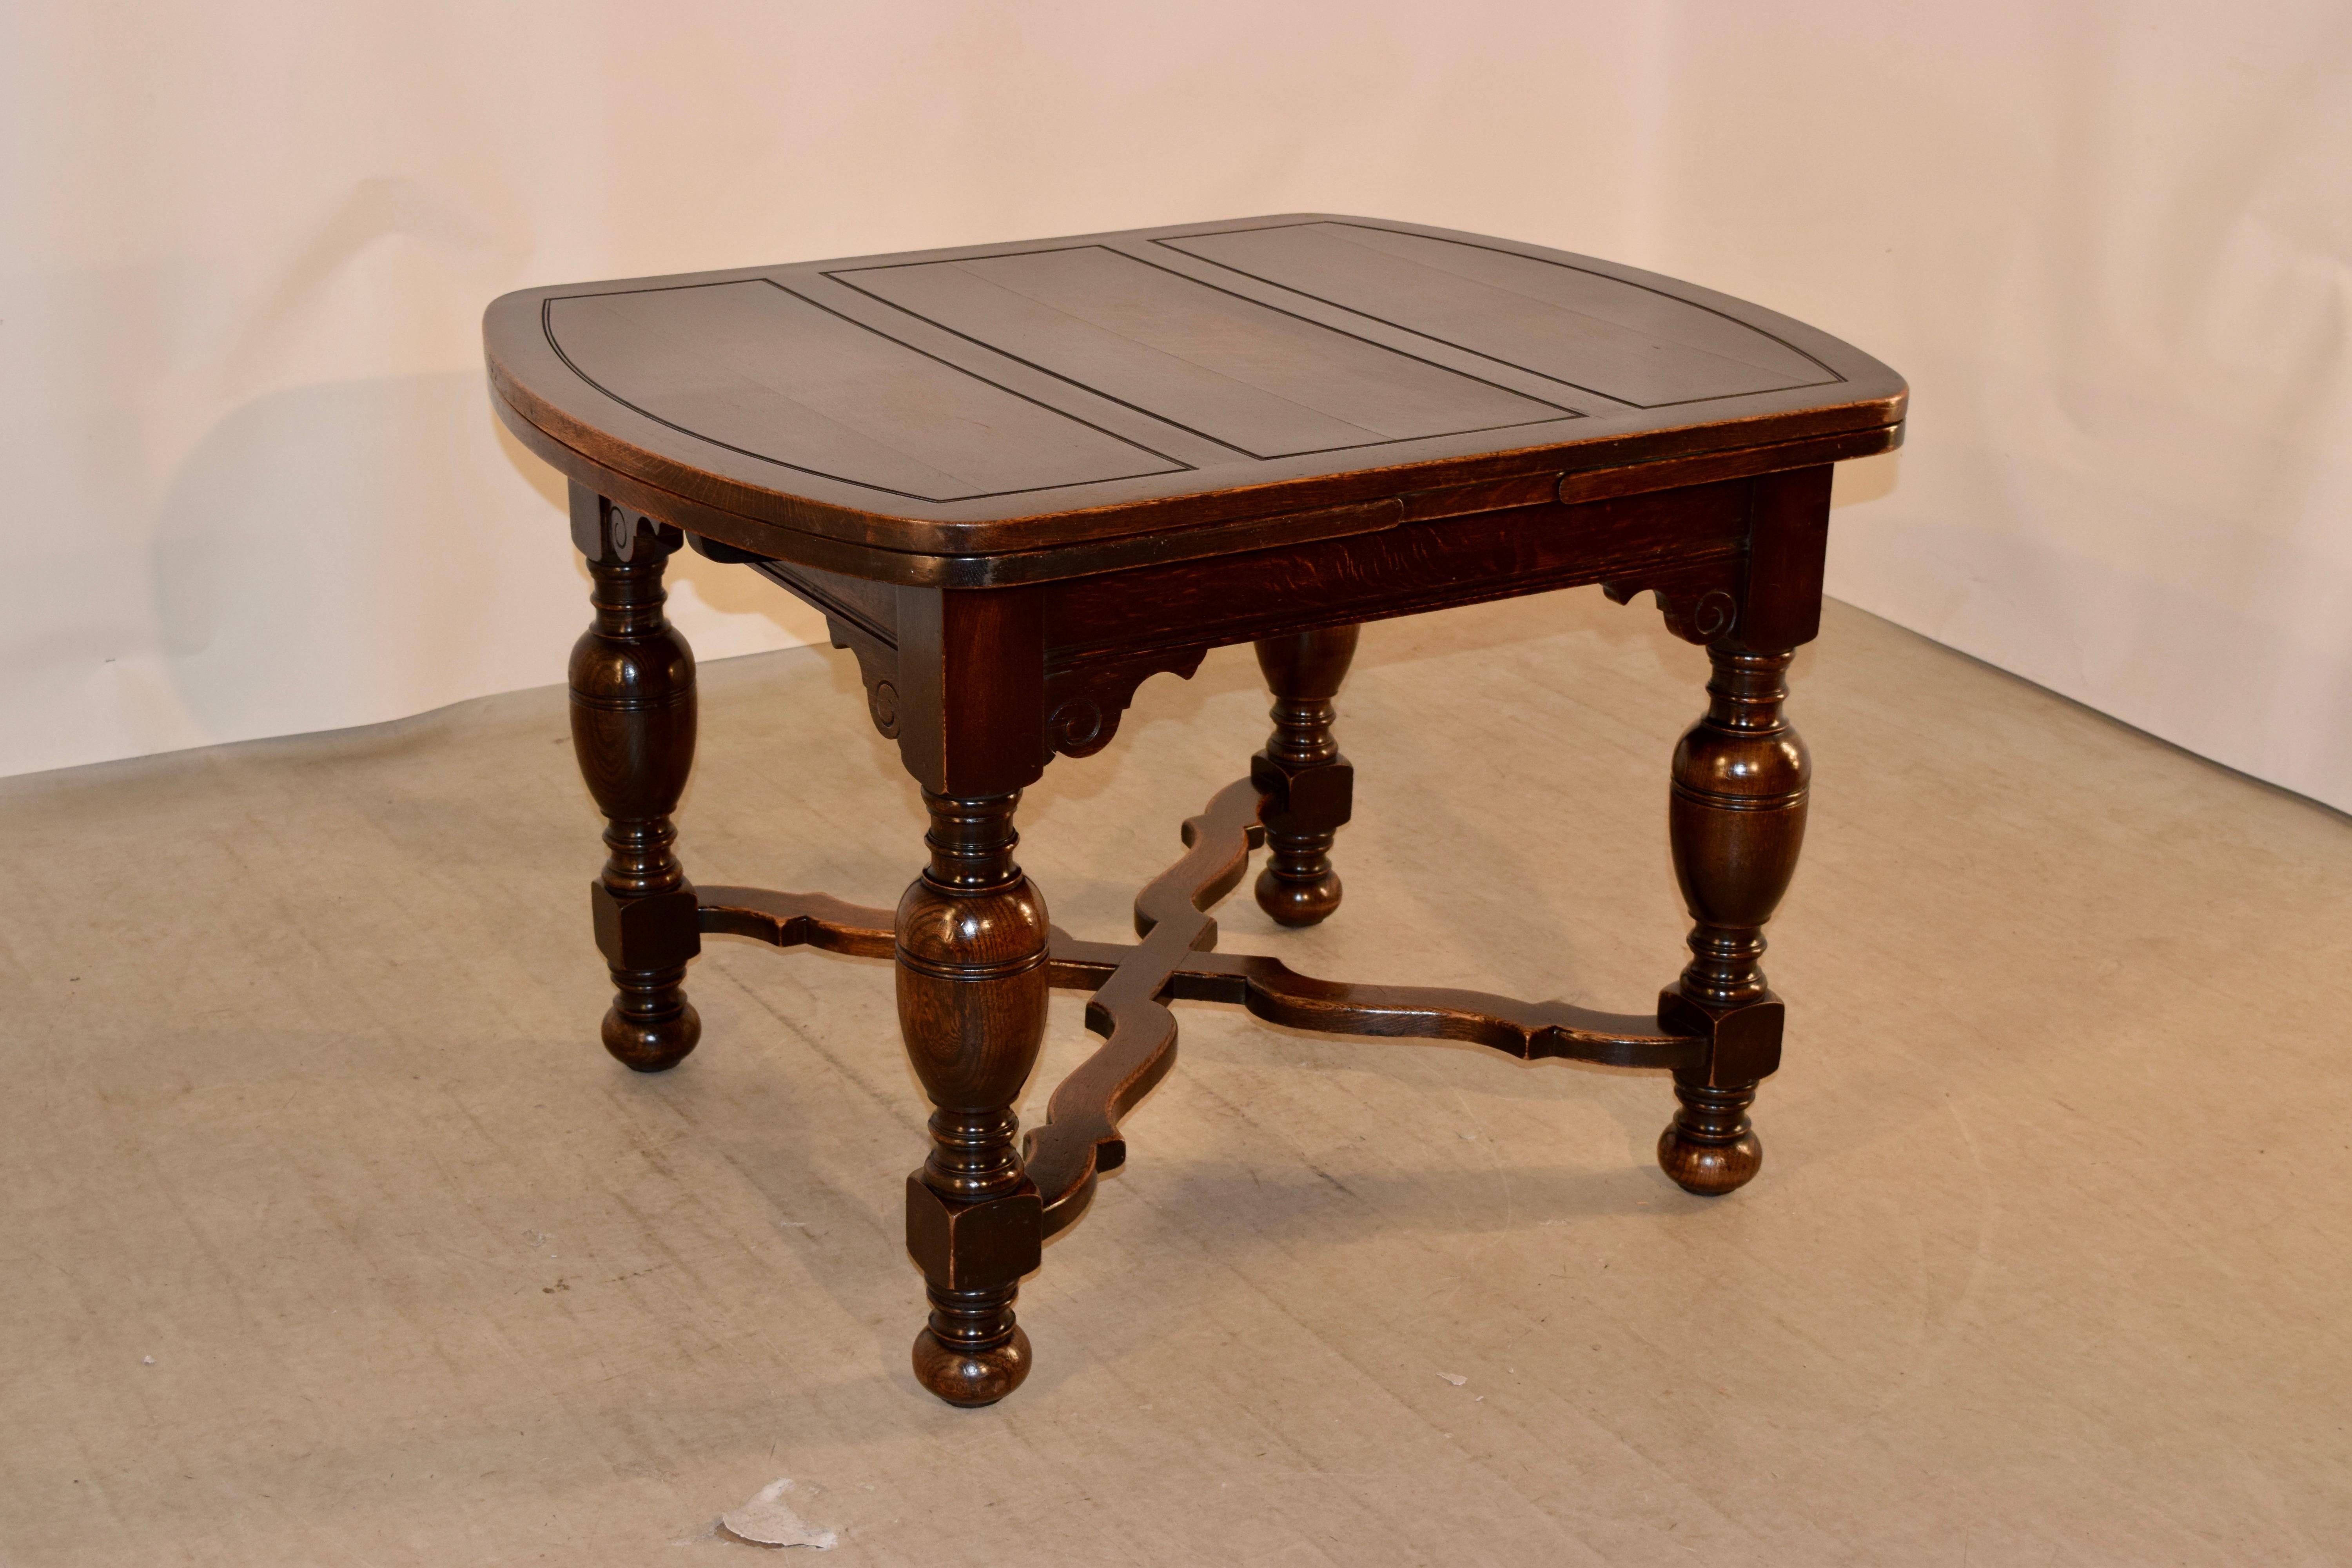 Late 19th century oak draw leaf table from England. The top has three panels with shaped ends, and has two paneled leaves that pull out and are shaped to match. The apron is routed along the edge and is embellished with scrolled brackets. The legs